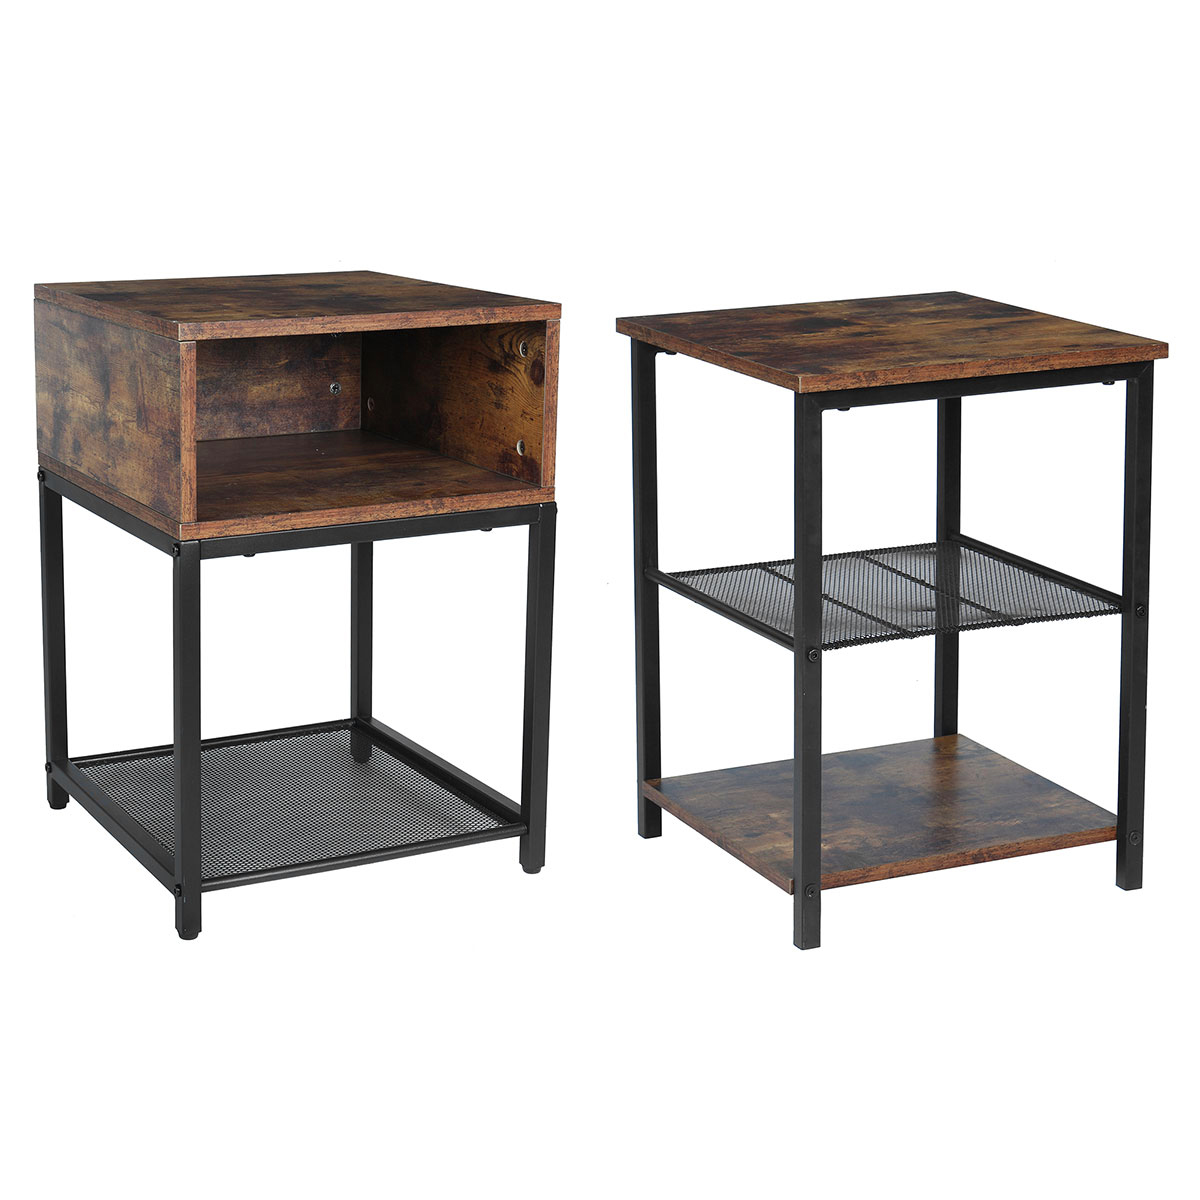 Find Nightstands 2, 3-Tier Side Table with Adjustable Shelf, Industrial End Table for Small Space in Living Room, Bedroom and Balcony, Stable Metal Frame, Rustic Brown for Sale on Gipsybee.com with cryptocurrencies